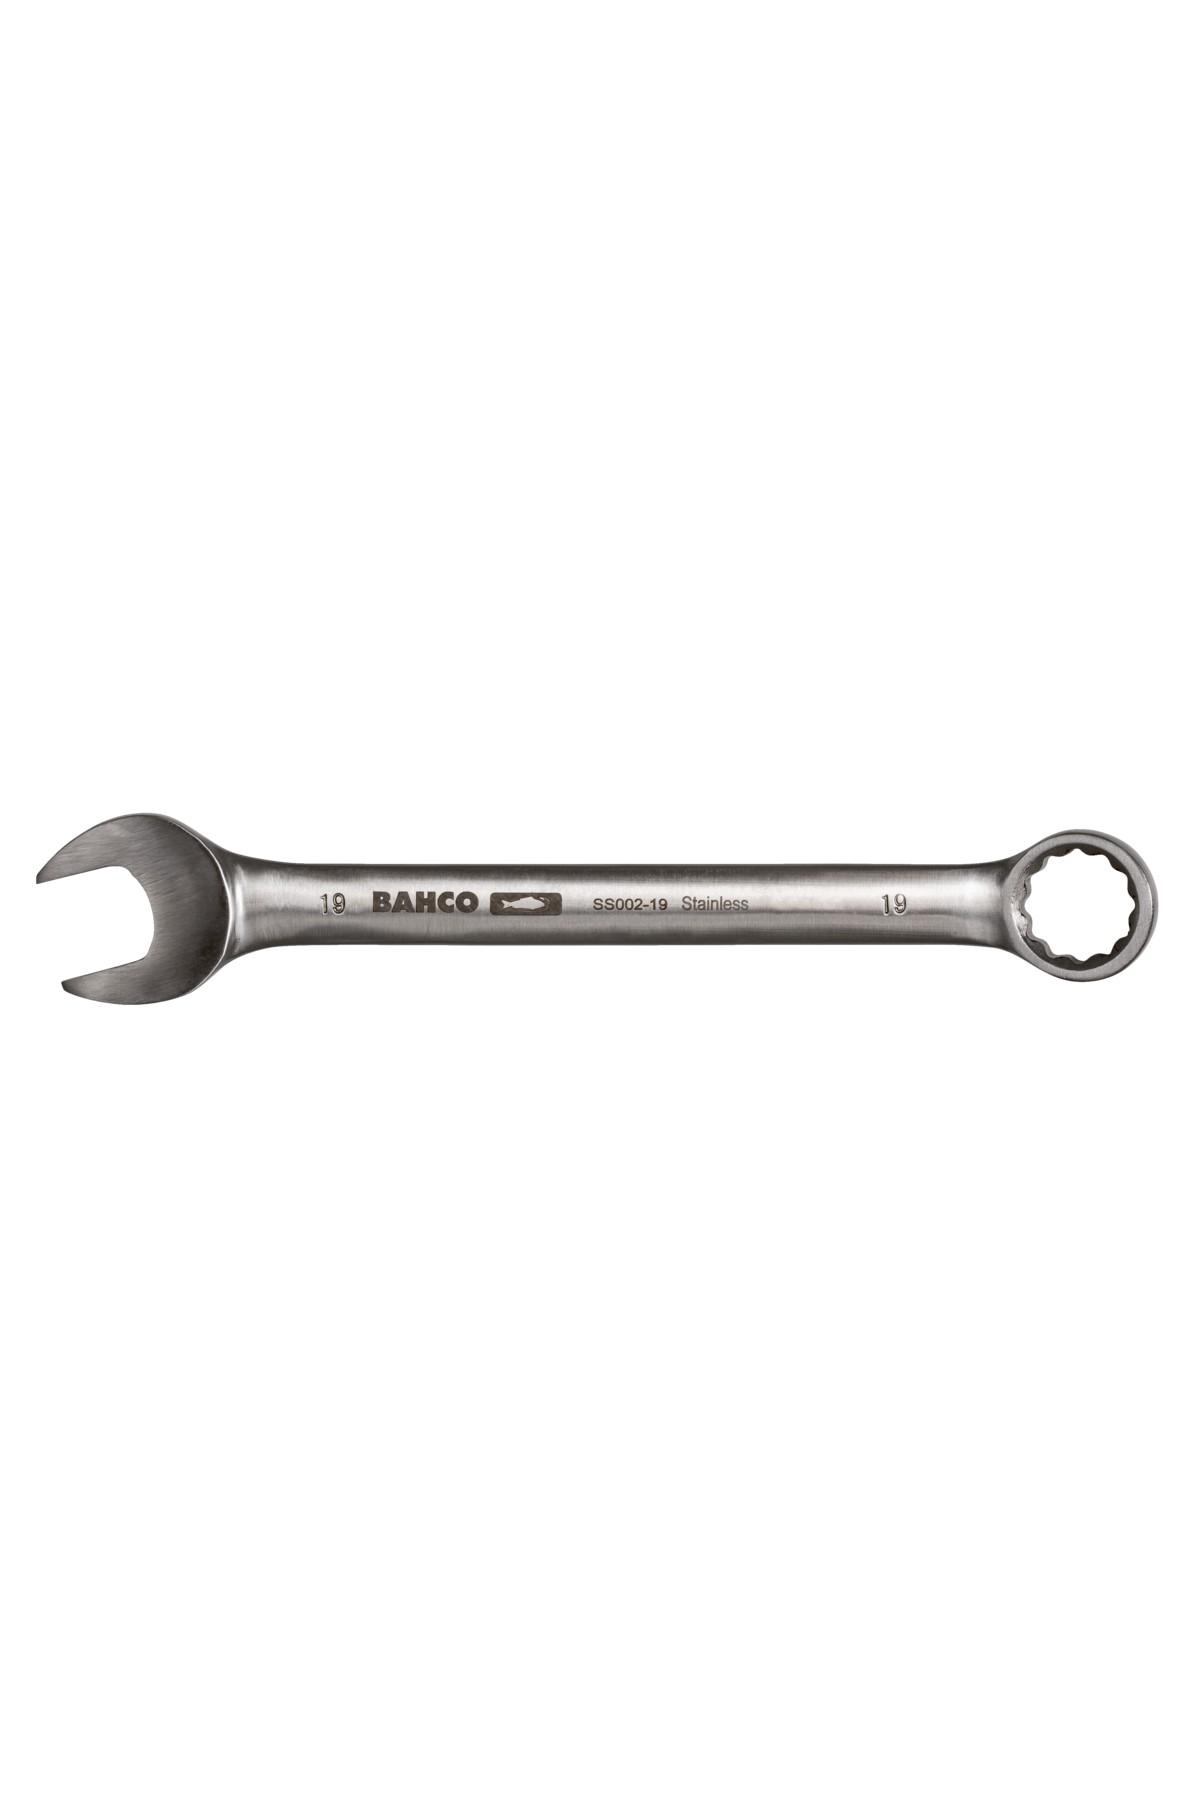 Ring spanner stainless steel 6mm